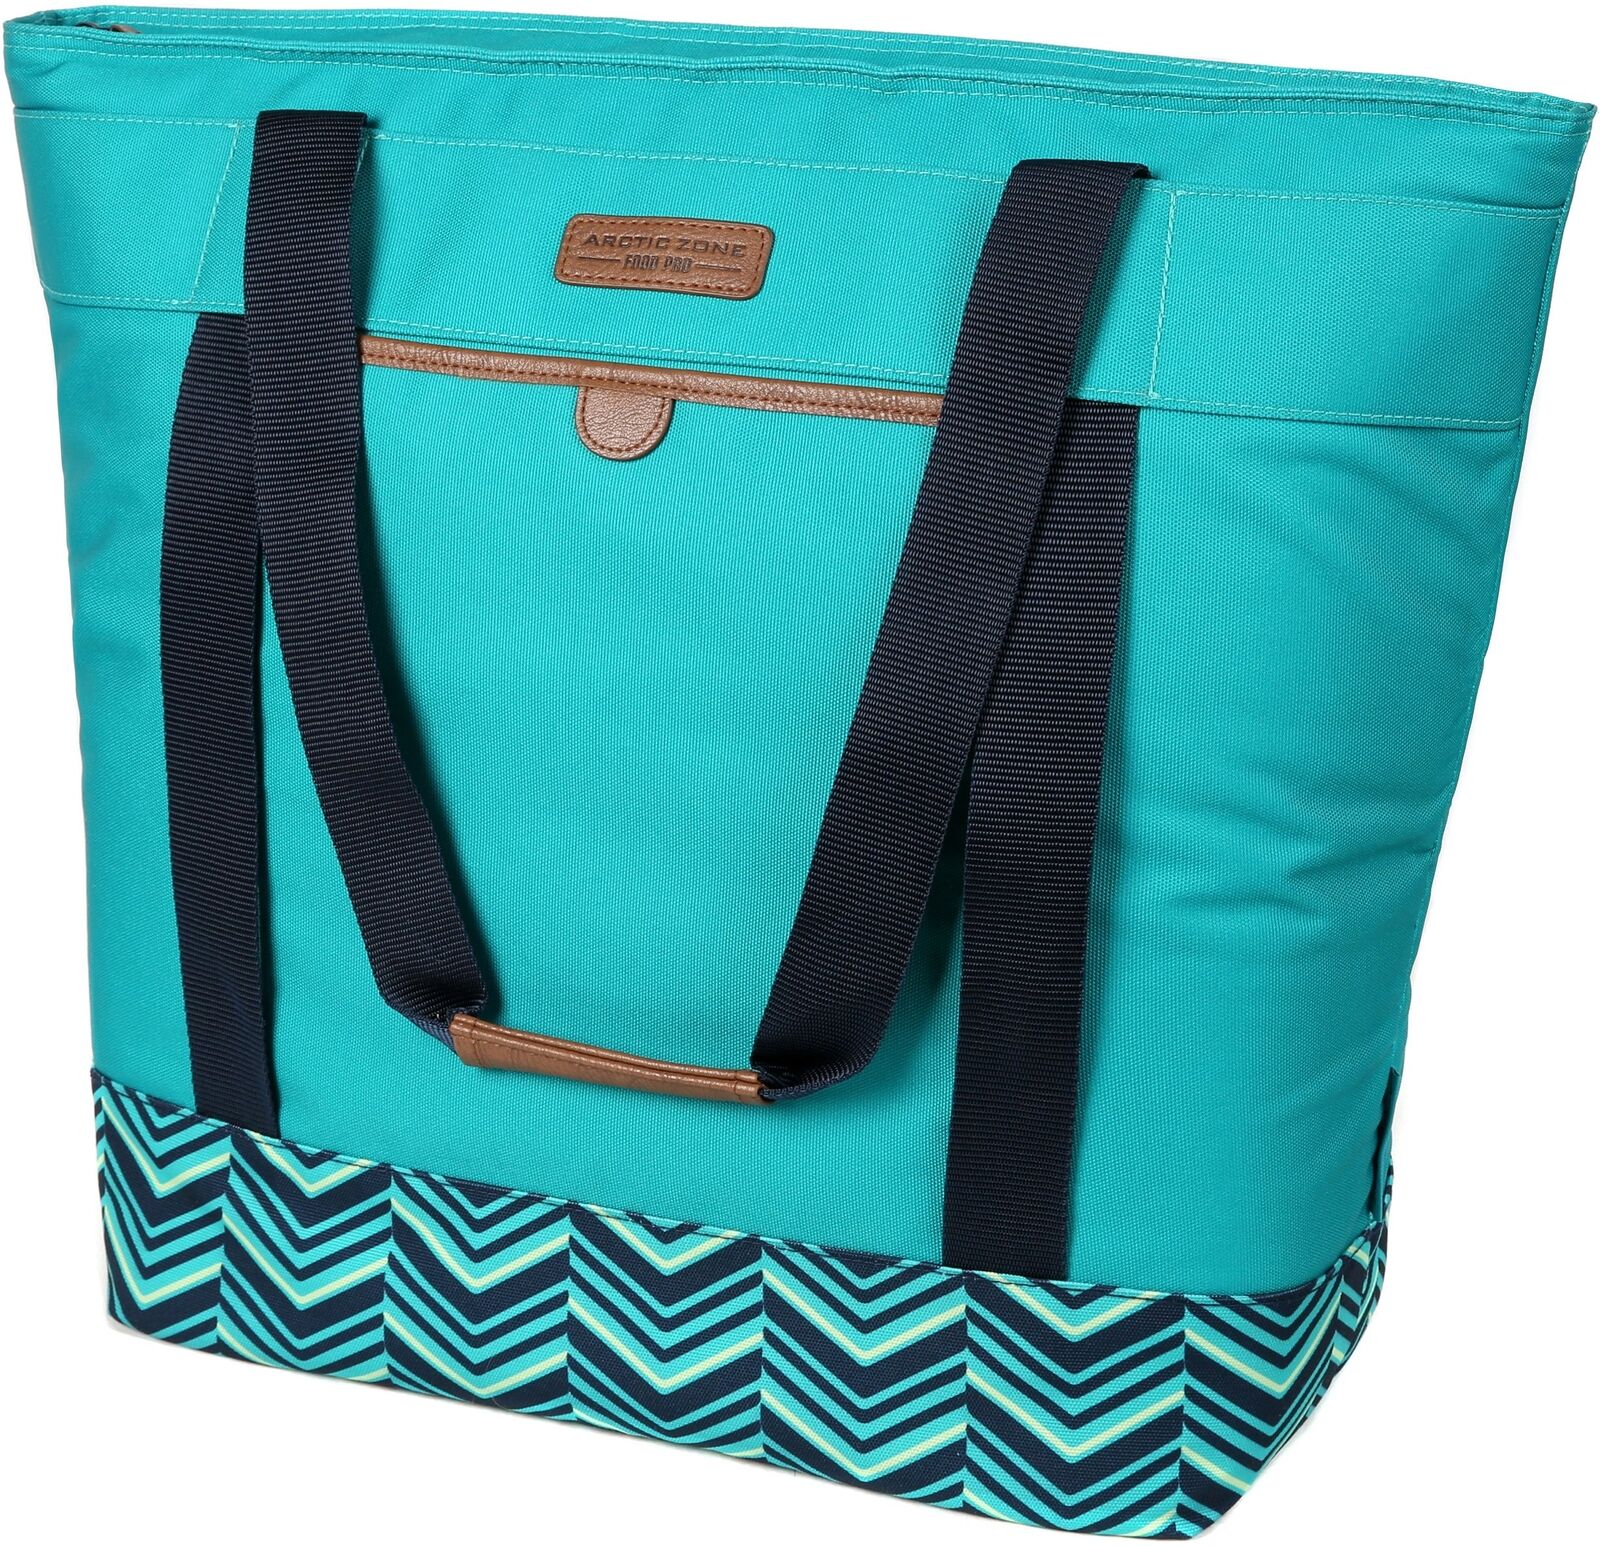 5-12140-17-0E Jumbo Thermal Insulated Tote Hot/Cold Food Carrier-Large Teal